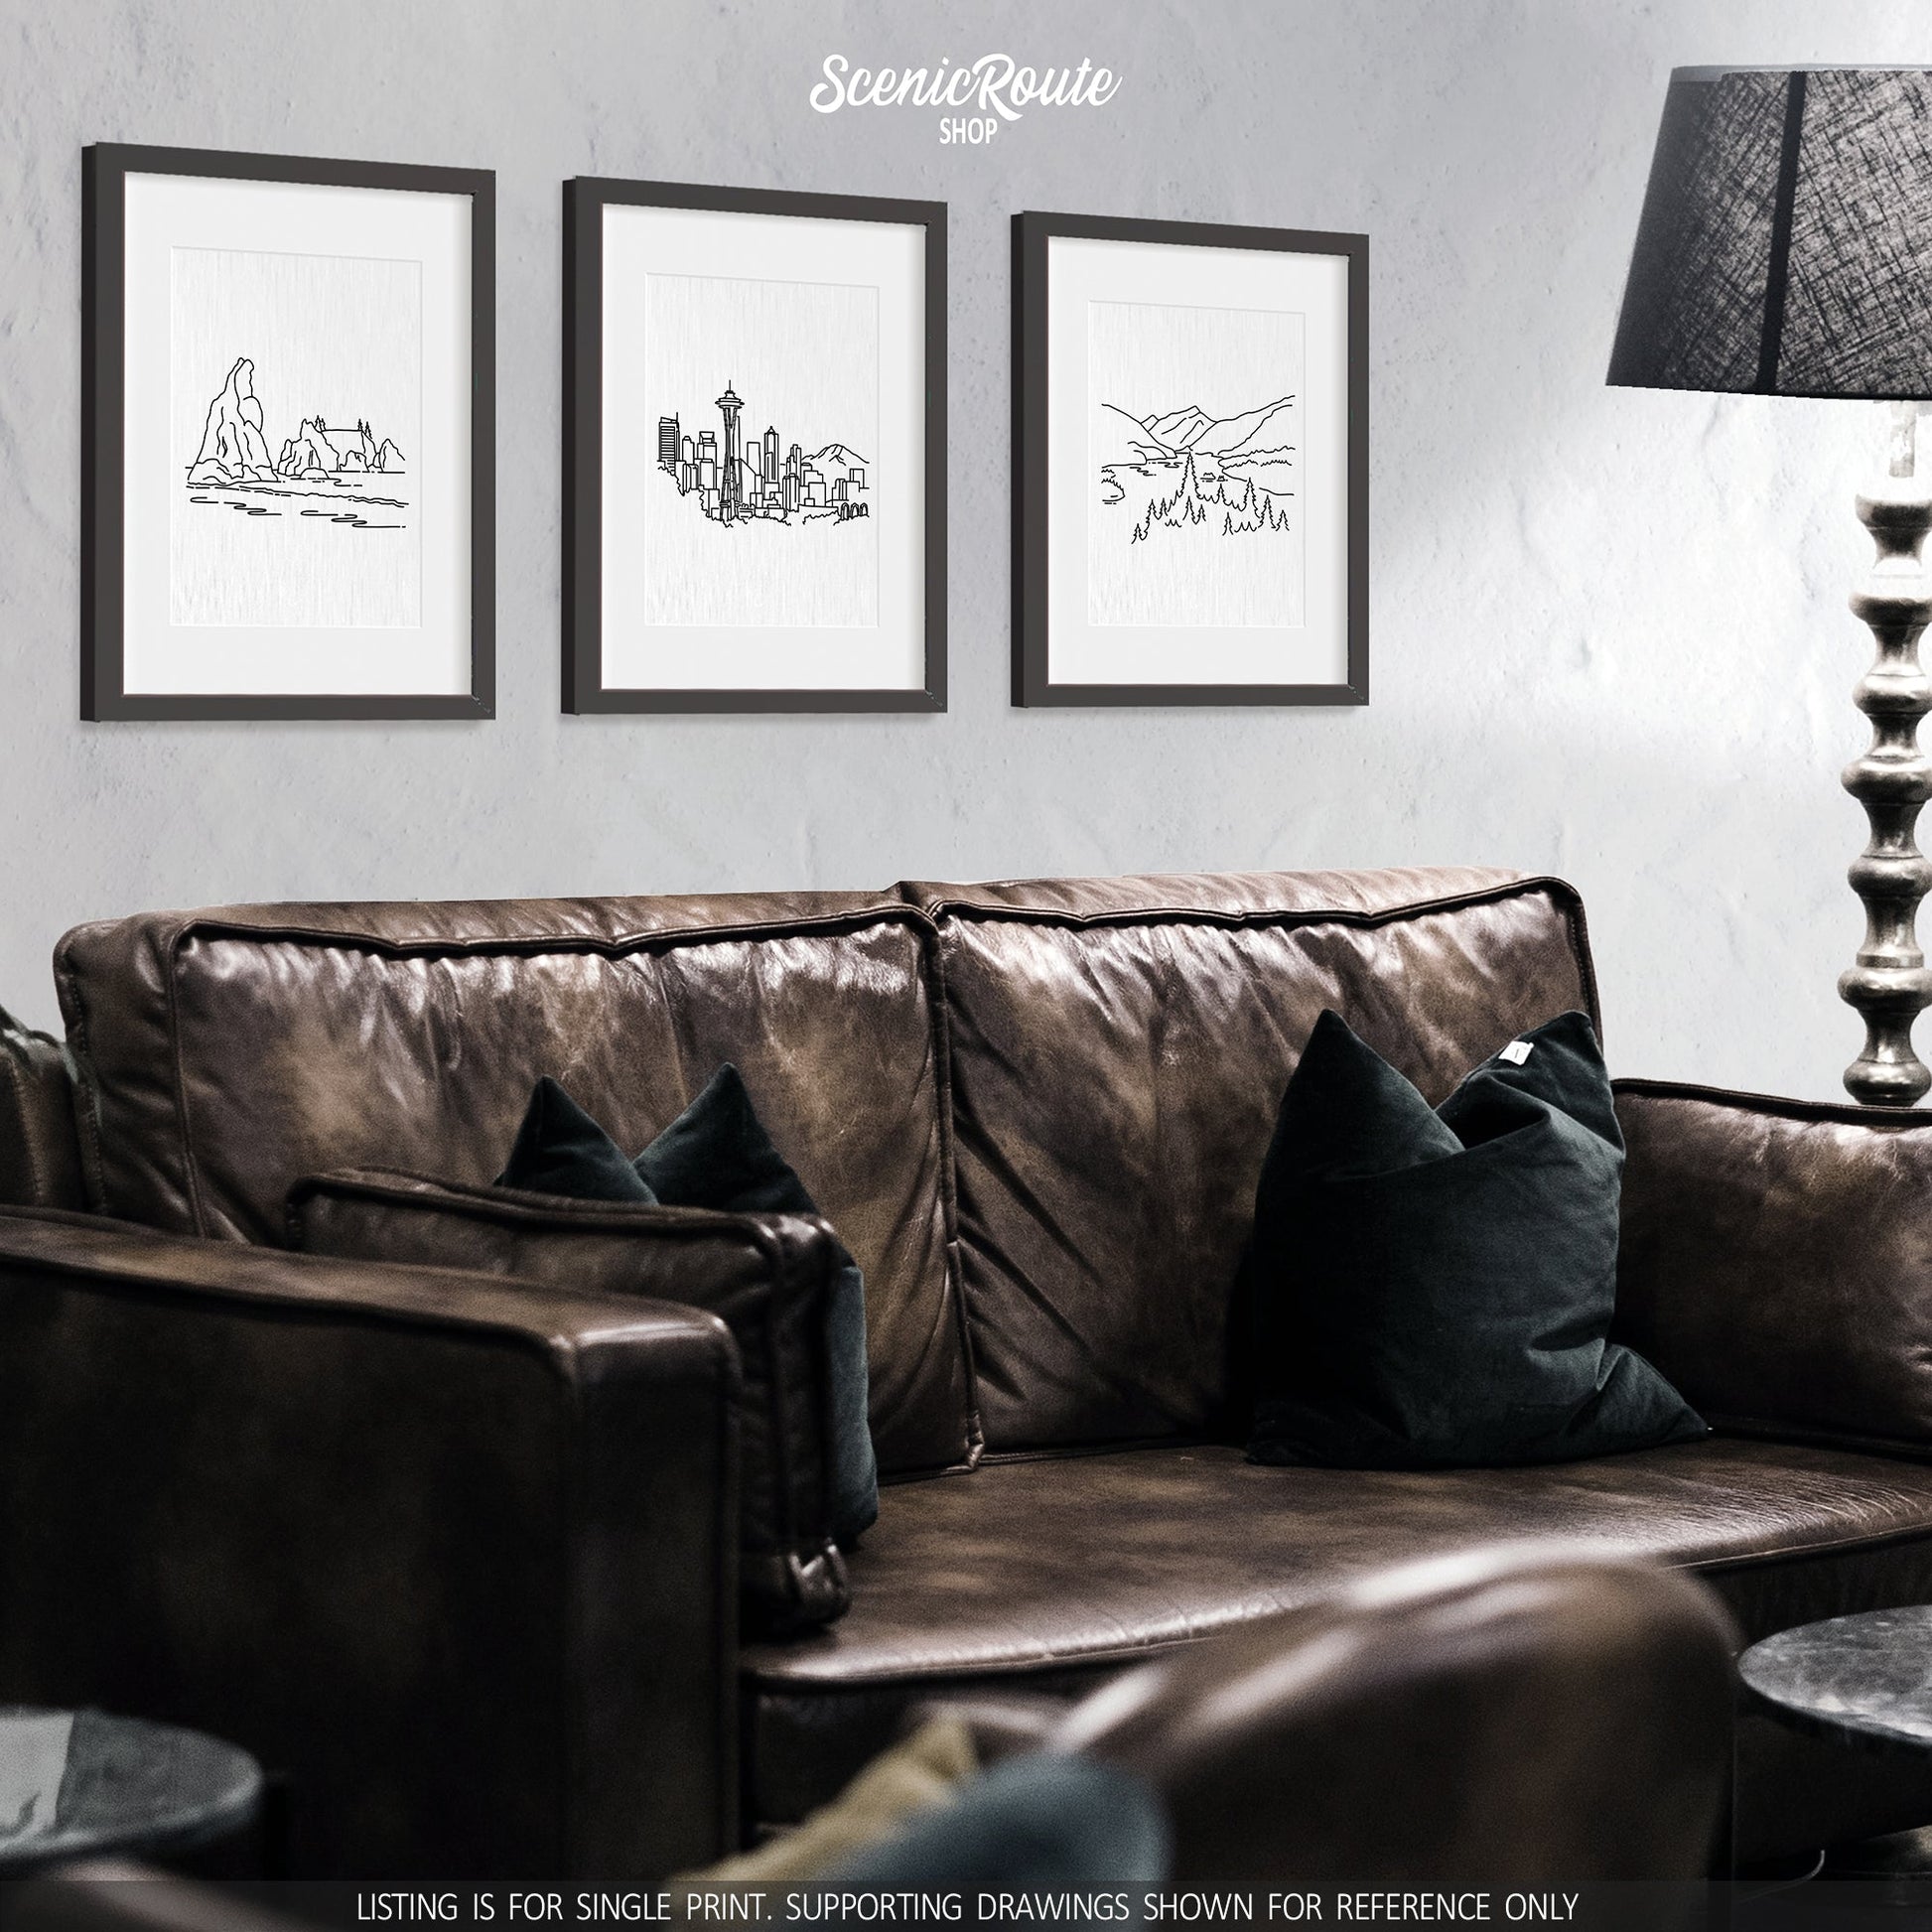 A group of three framed drawings on a wall above a couch. The line art drawings include Olympic National Park, Seattle Skyline, and North Cascades National Park